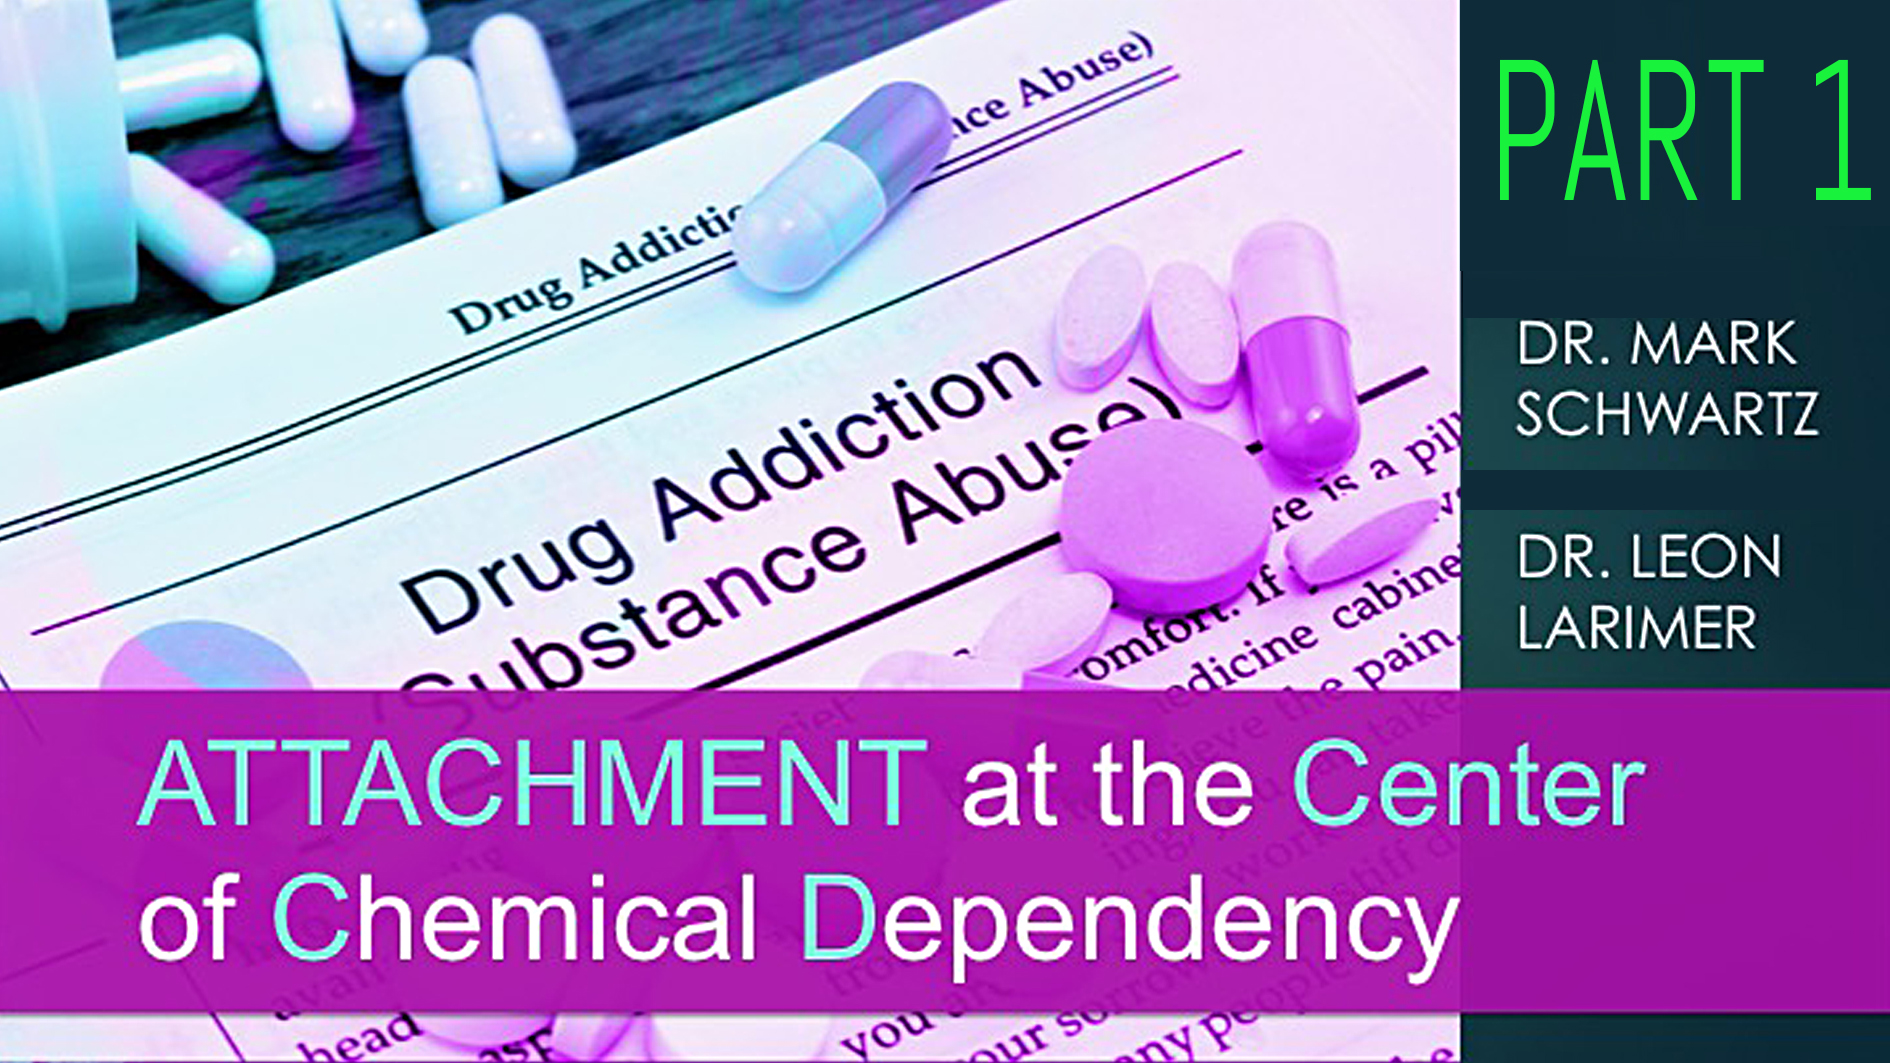 WEBINAR VIDEO – PART 1:  “Attachment at the Center of Chemical Dependency”